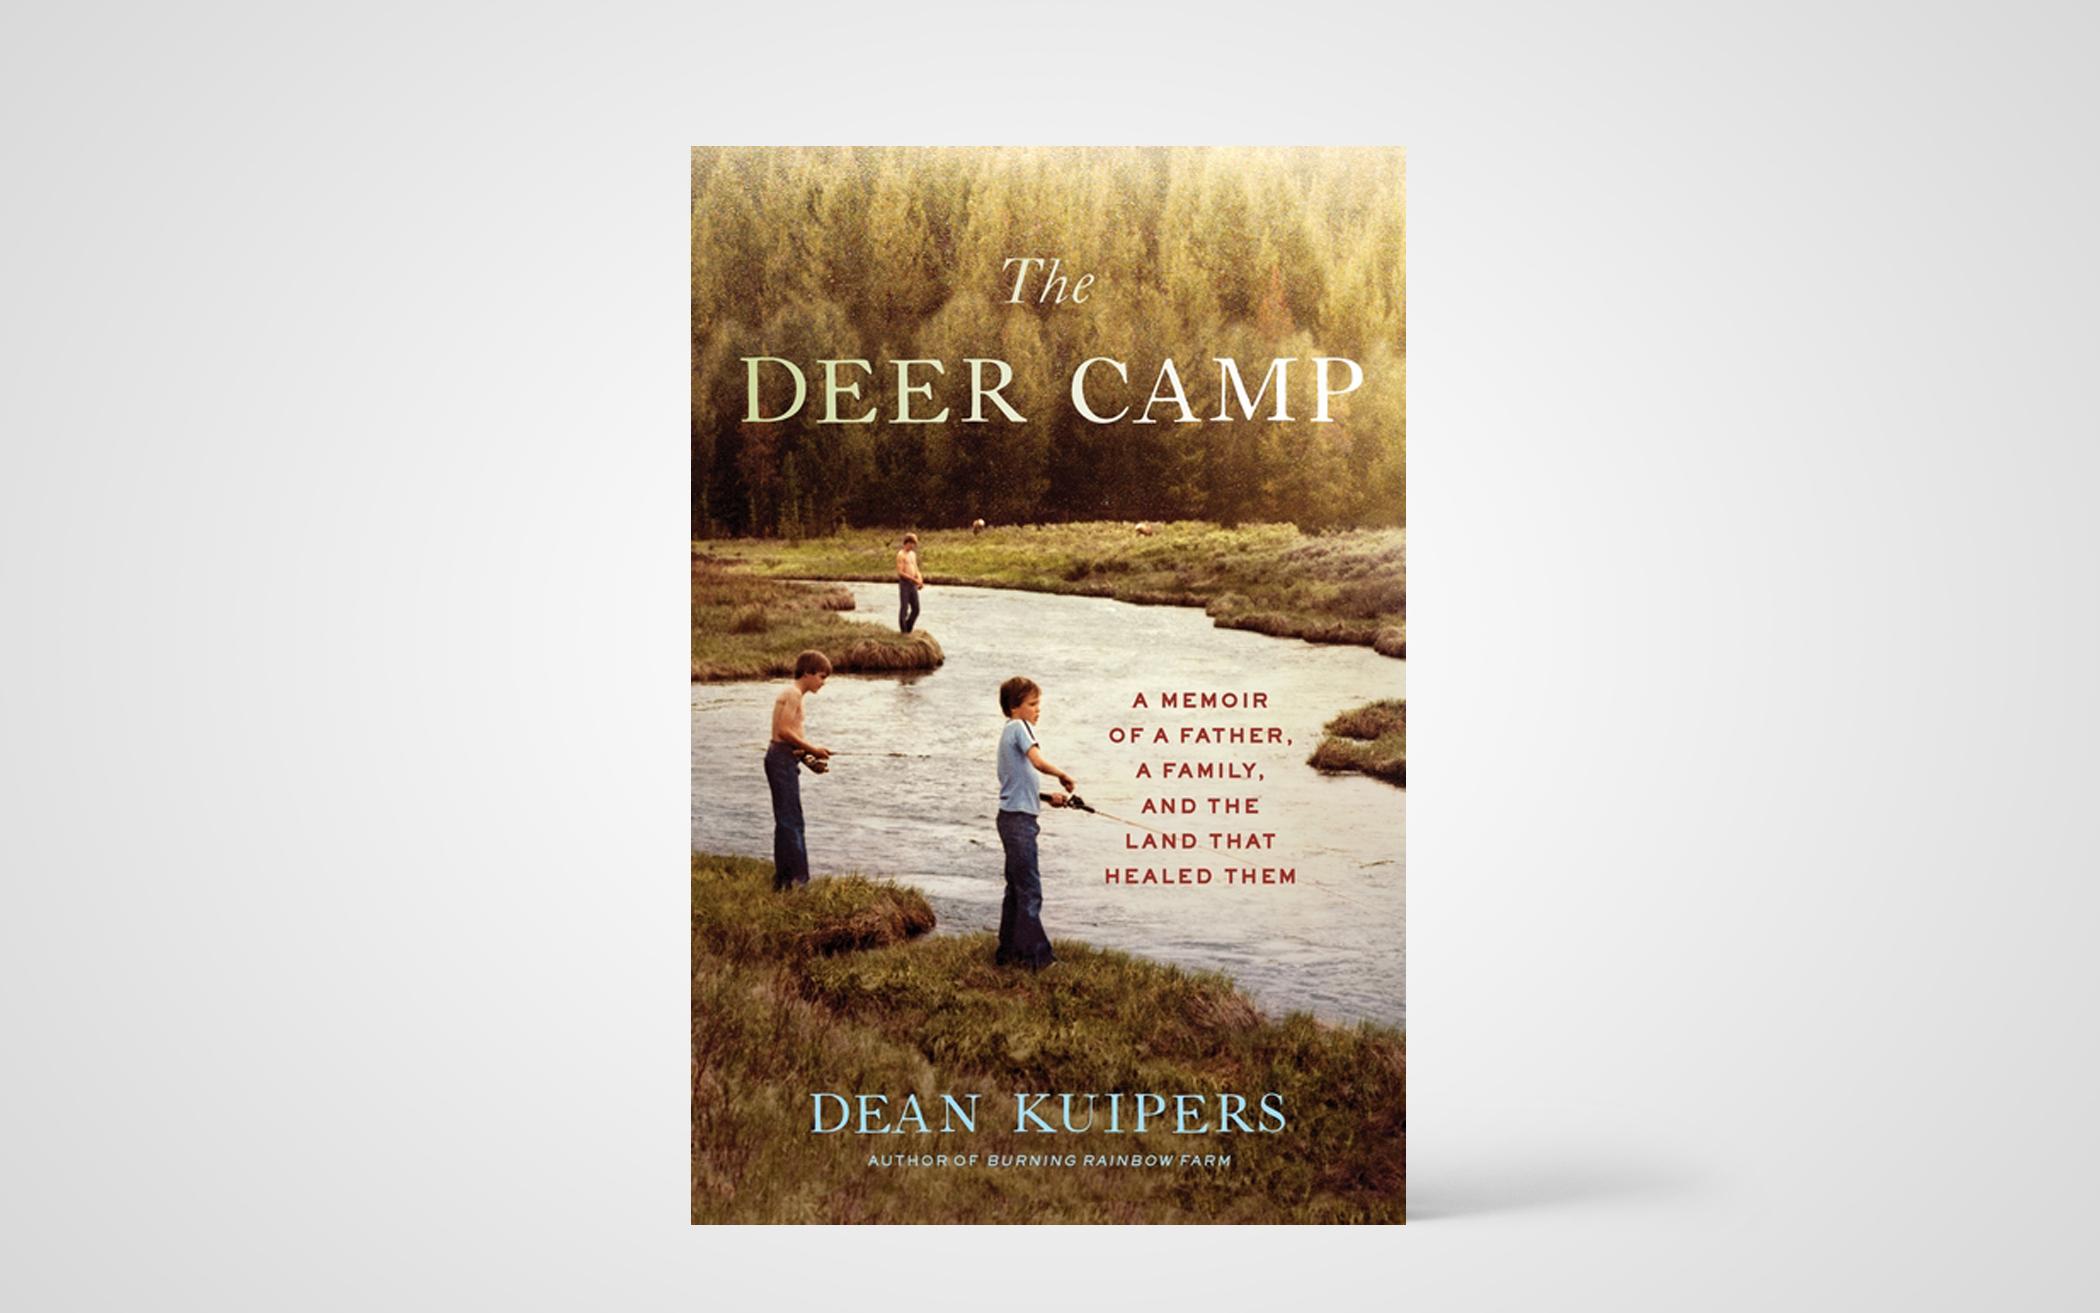 The Deer Camp: A Memoir of a Father, a Family, and the Land that Healed Them